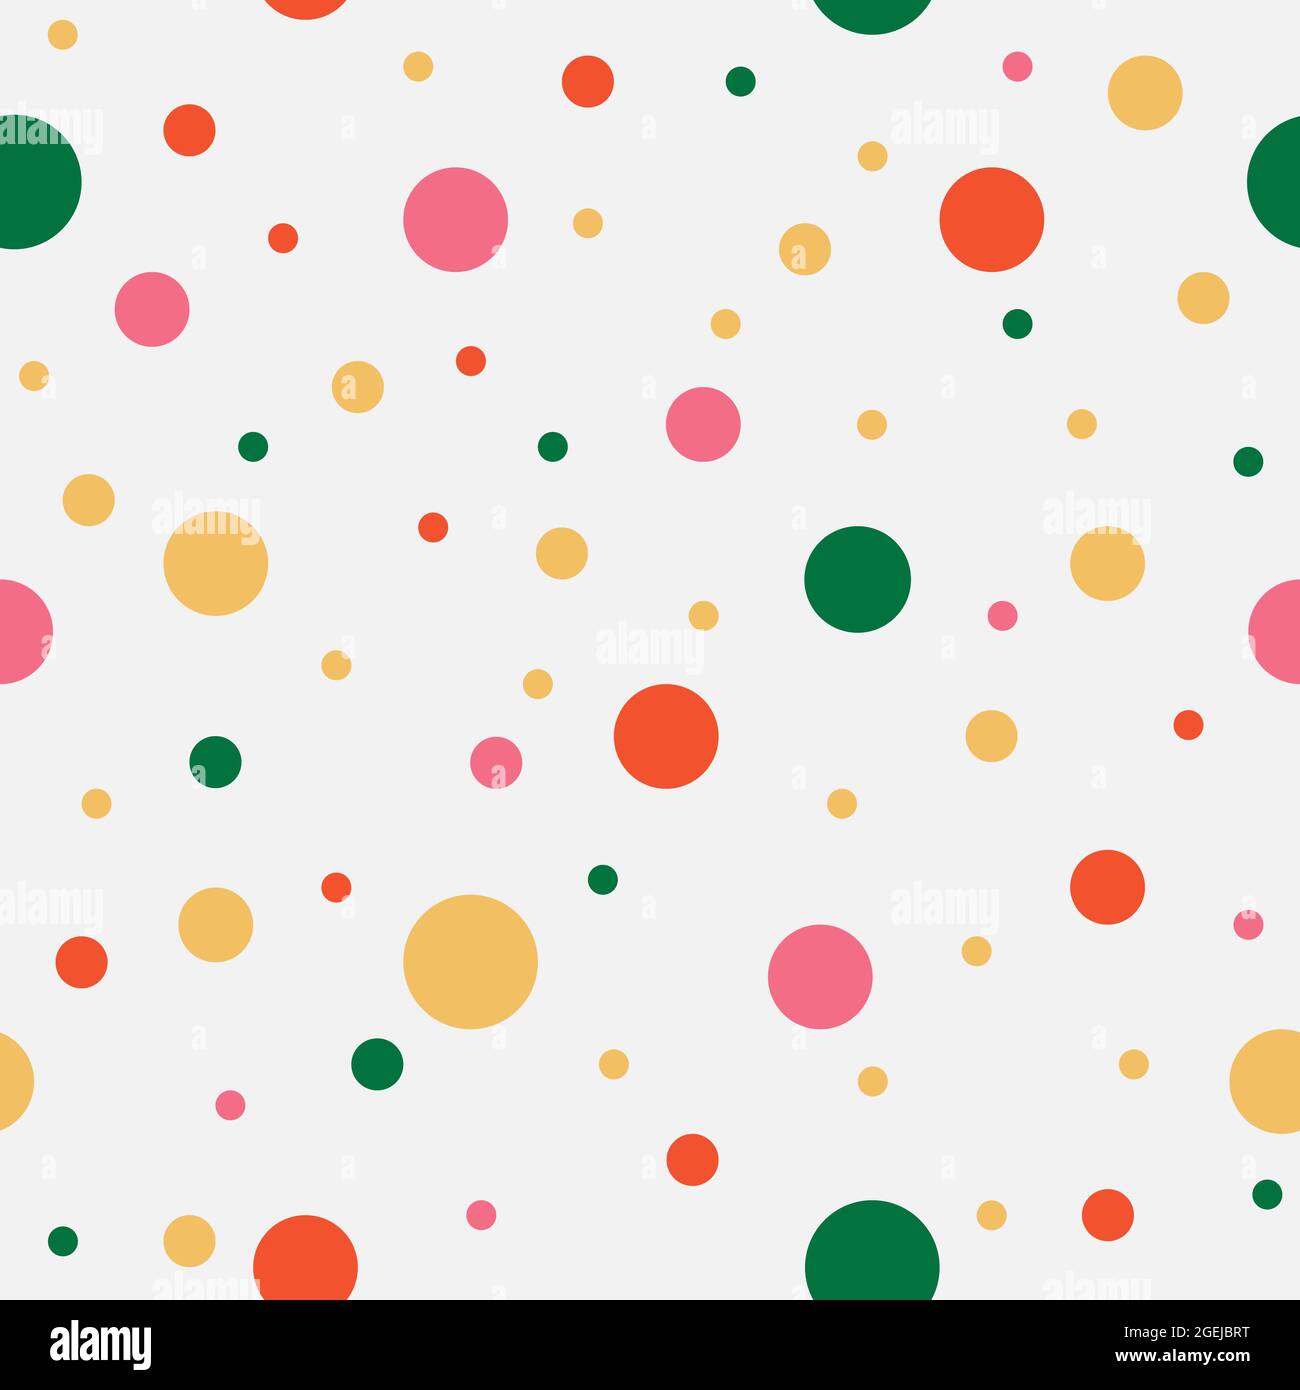 Colorful chaotic dots. Yellow, green, pink, orange circles on light background. Vector seamless pattern. Bright abstract texture for your design Stock Vector